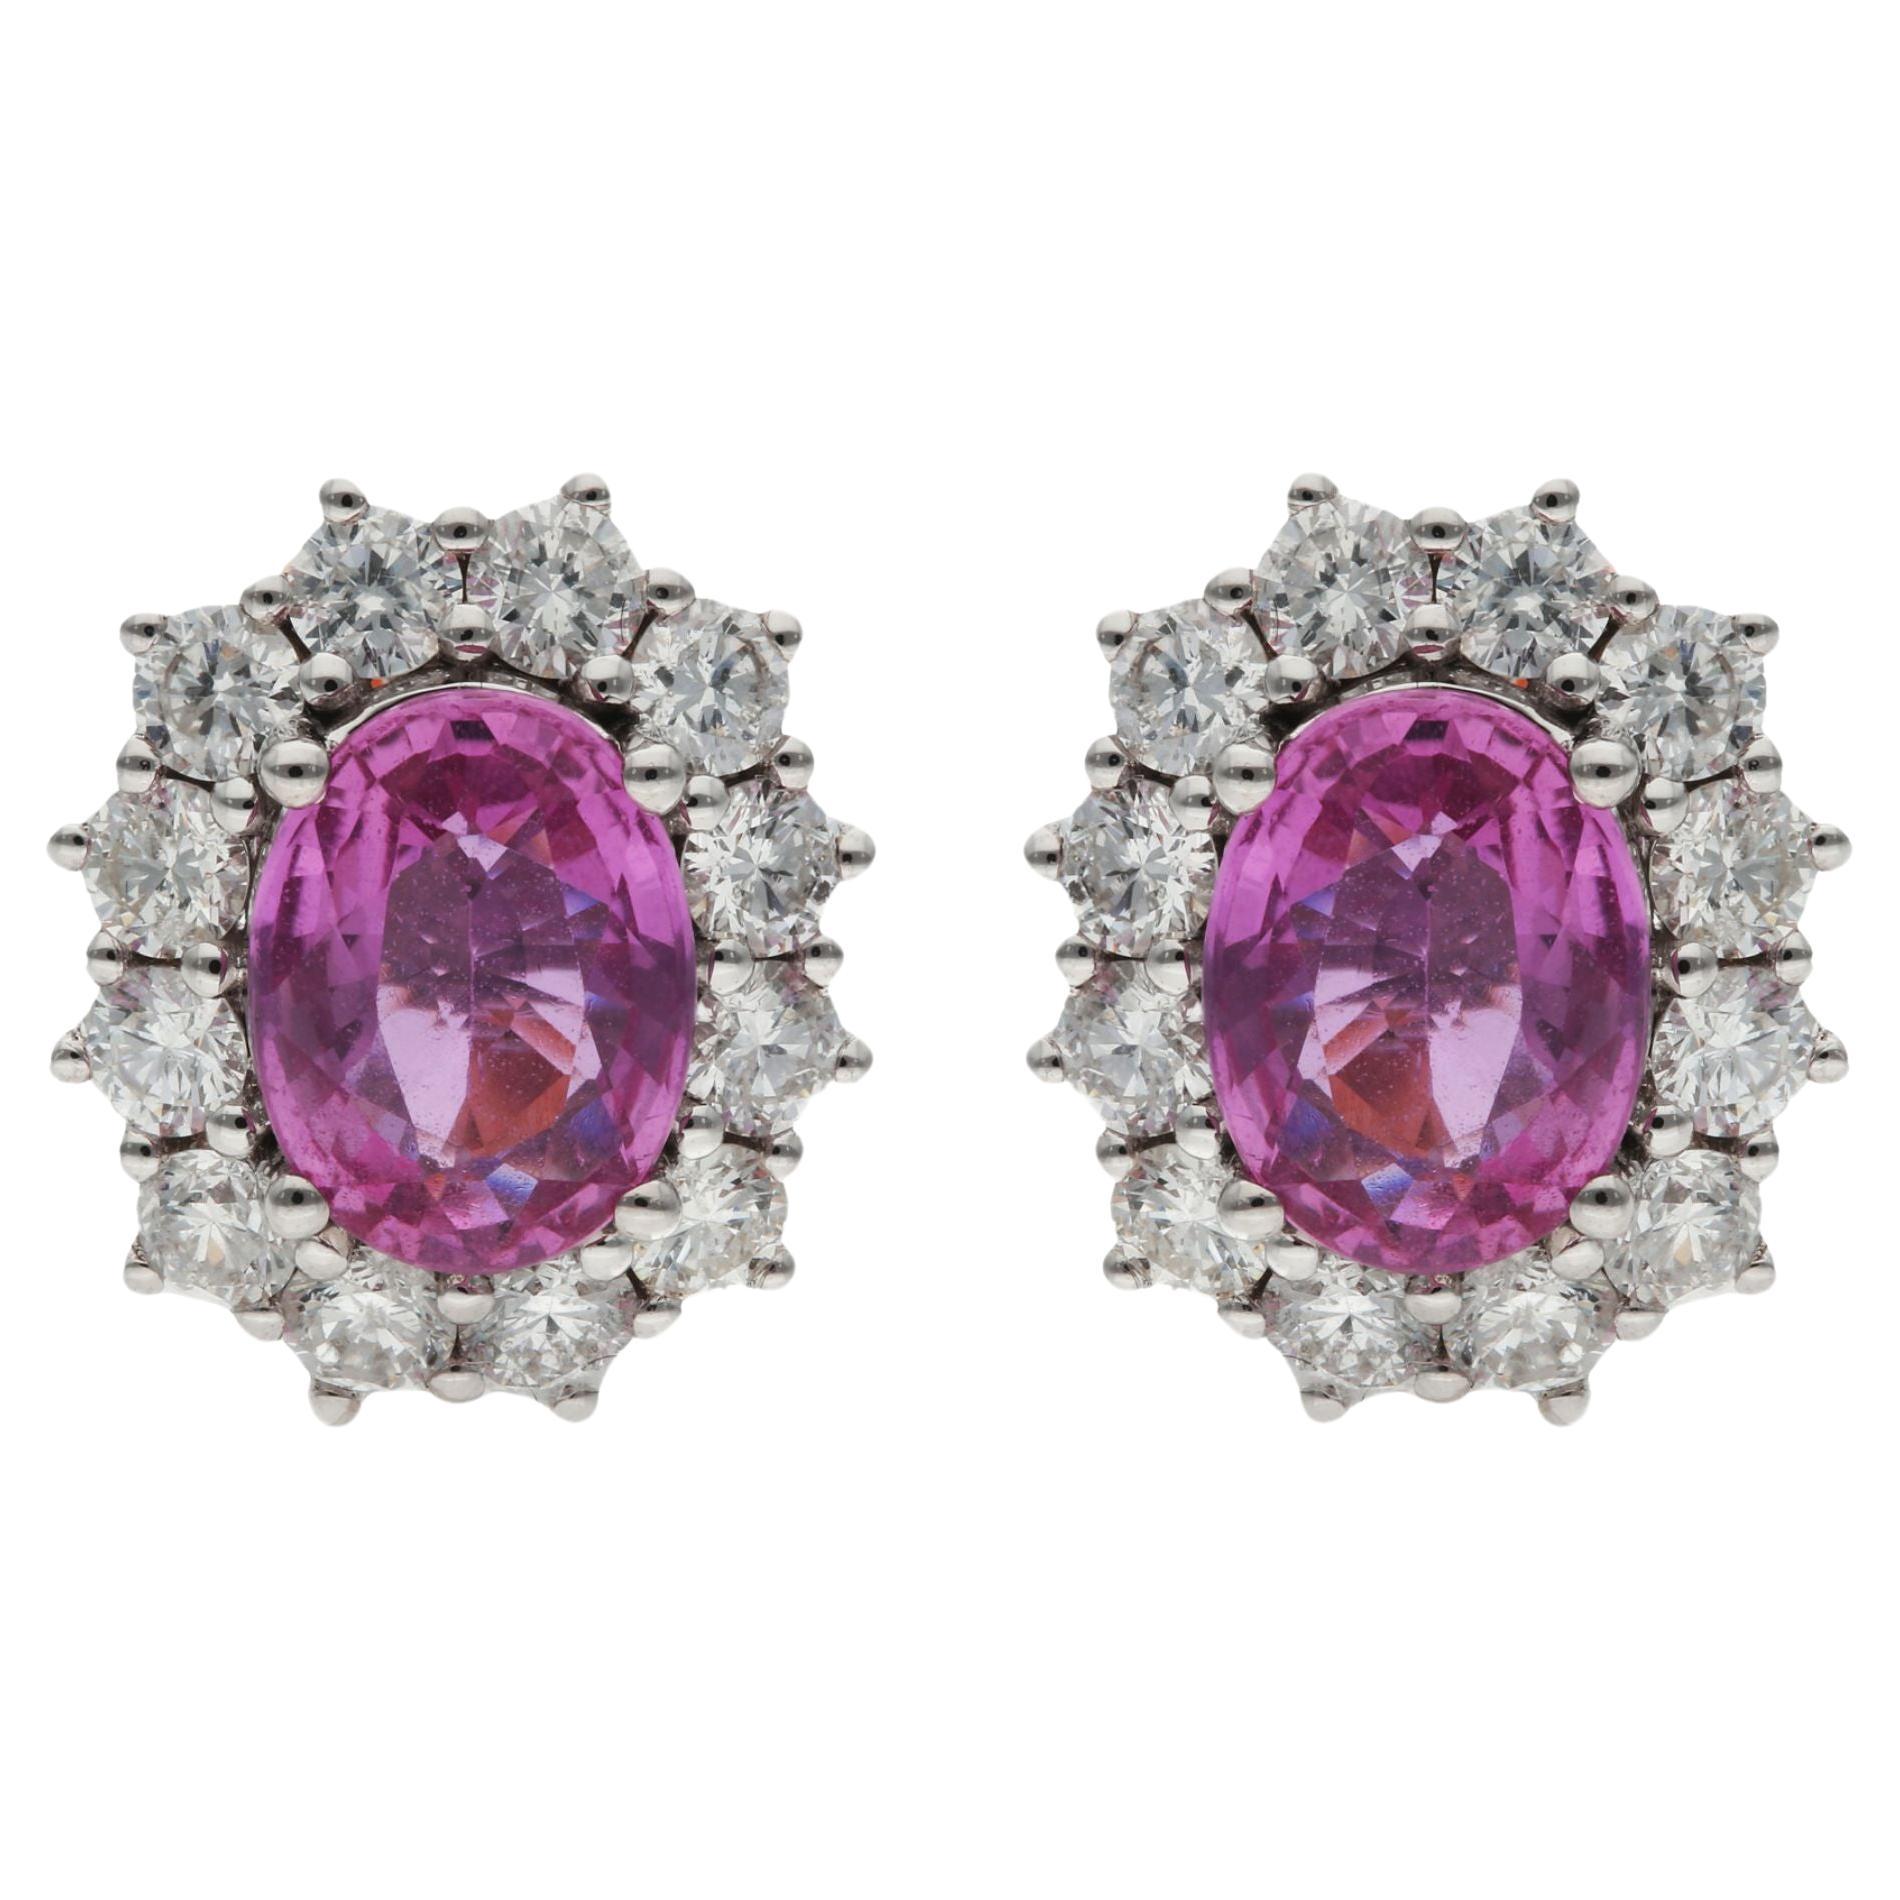 18ct White & Rose Gold 2.00ct Pink Sapphire & 1.20ct Diamond Halo Stud Earrings